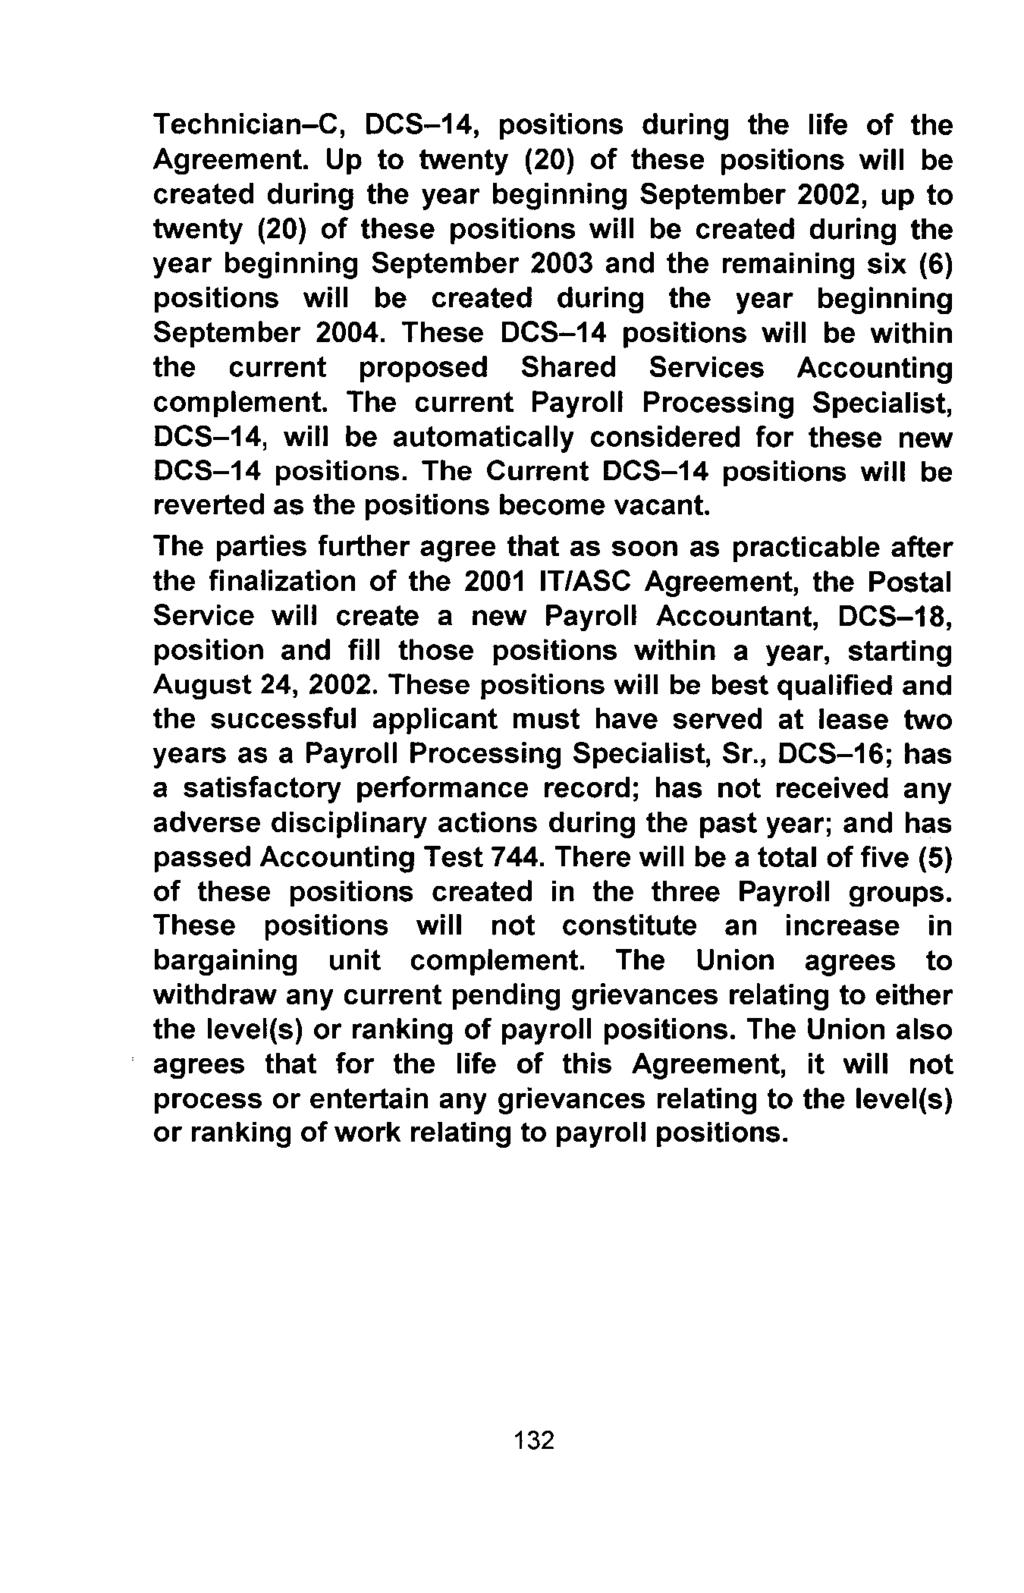 Technician-C, DCS-14, positions during the life of the Agreement.